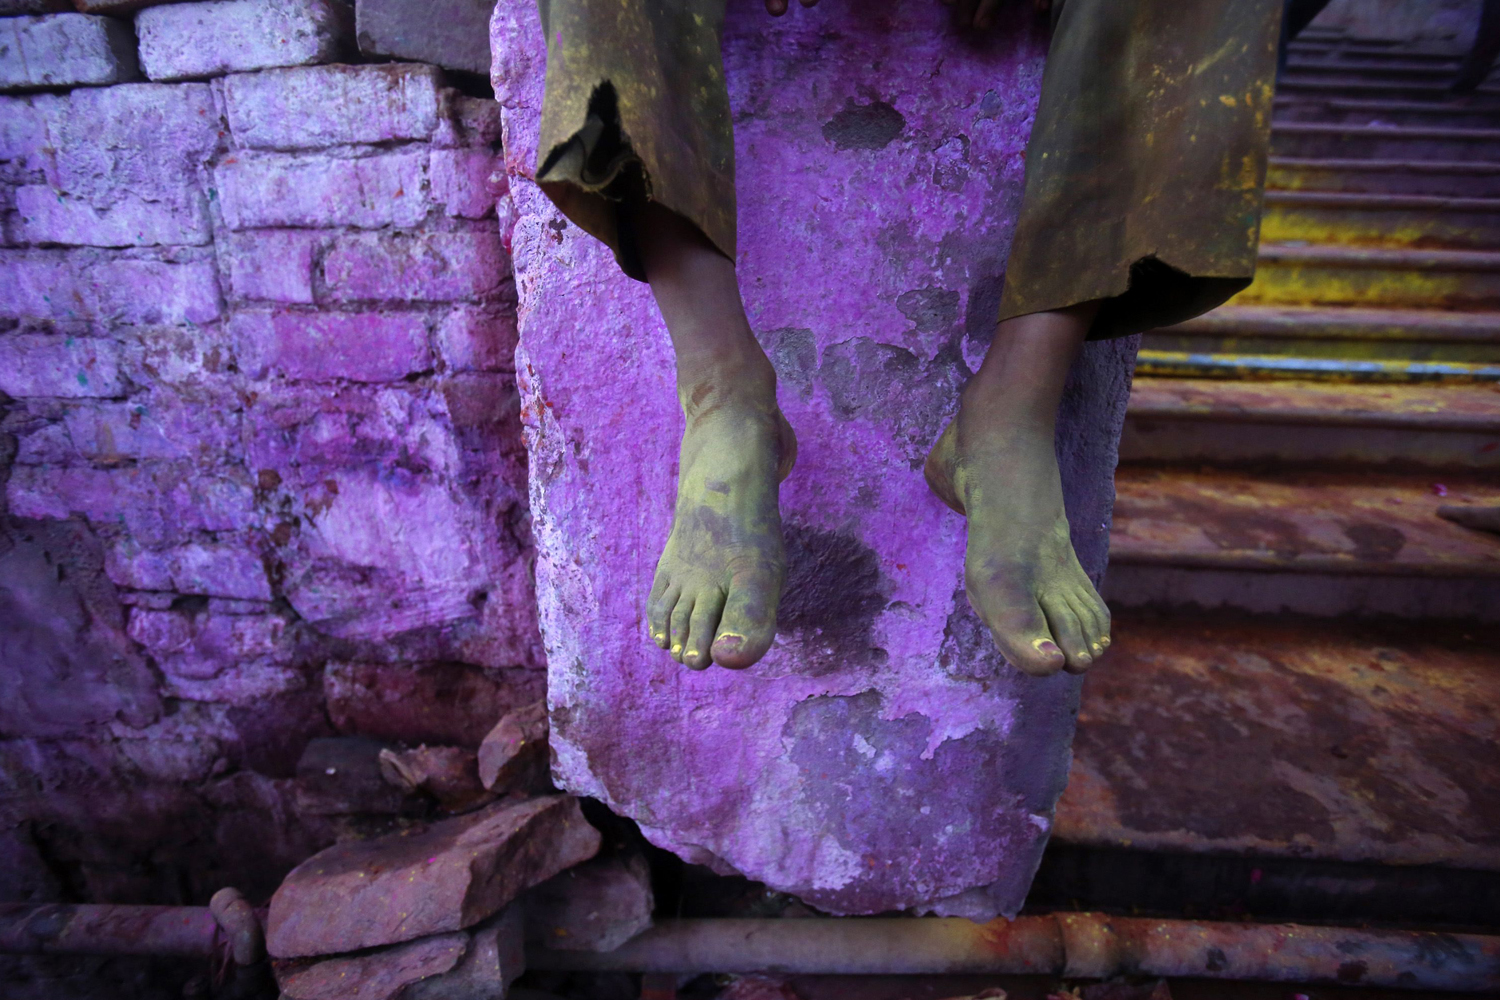 Coloured feet of a Hindu devotee are pictured outside a temple during "Lathmar Holi" at the village of Barsana